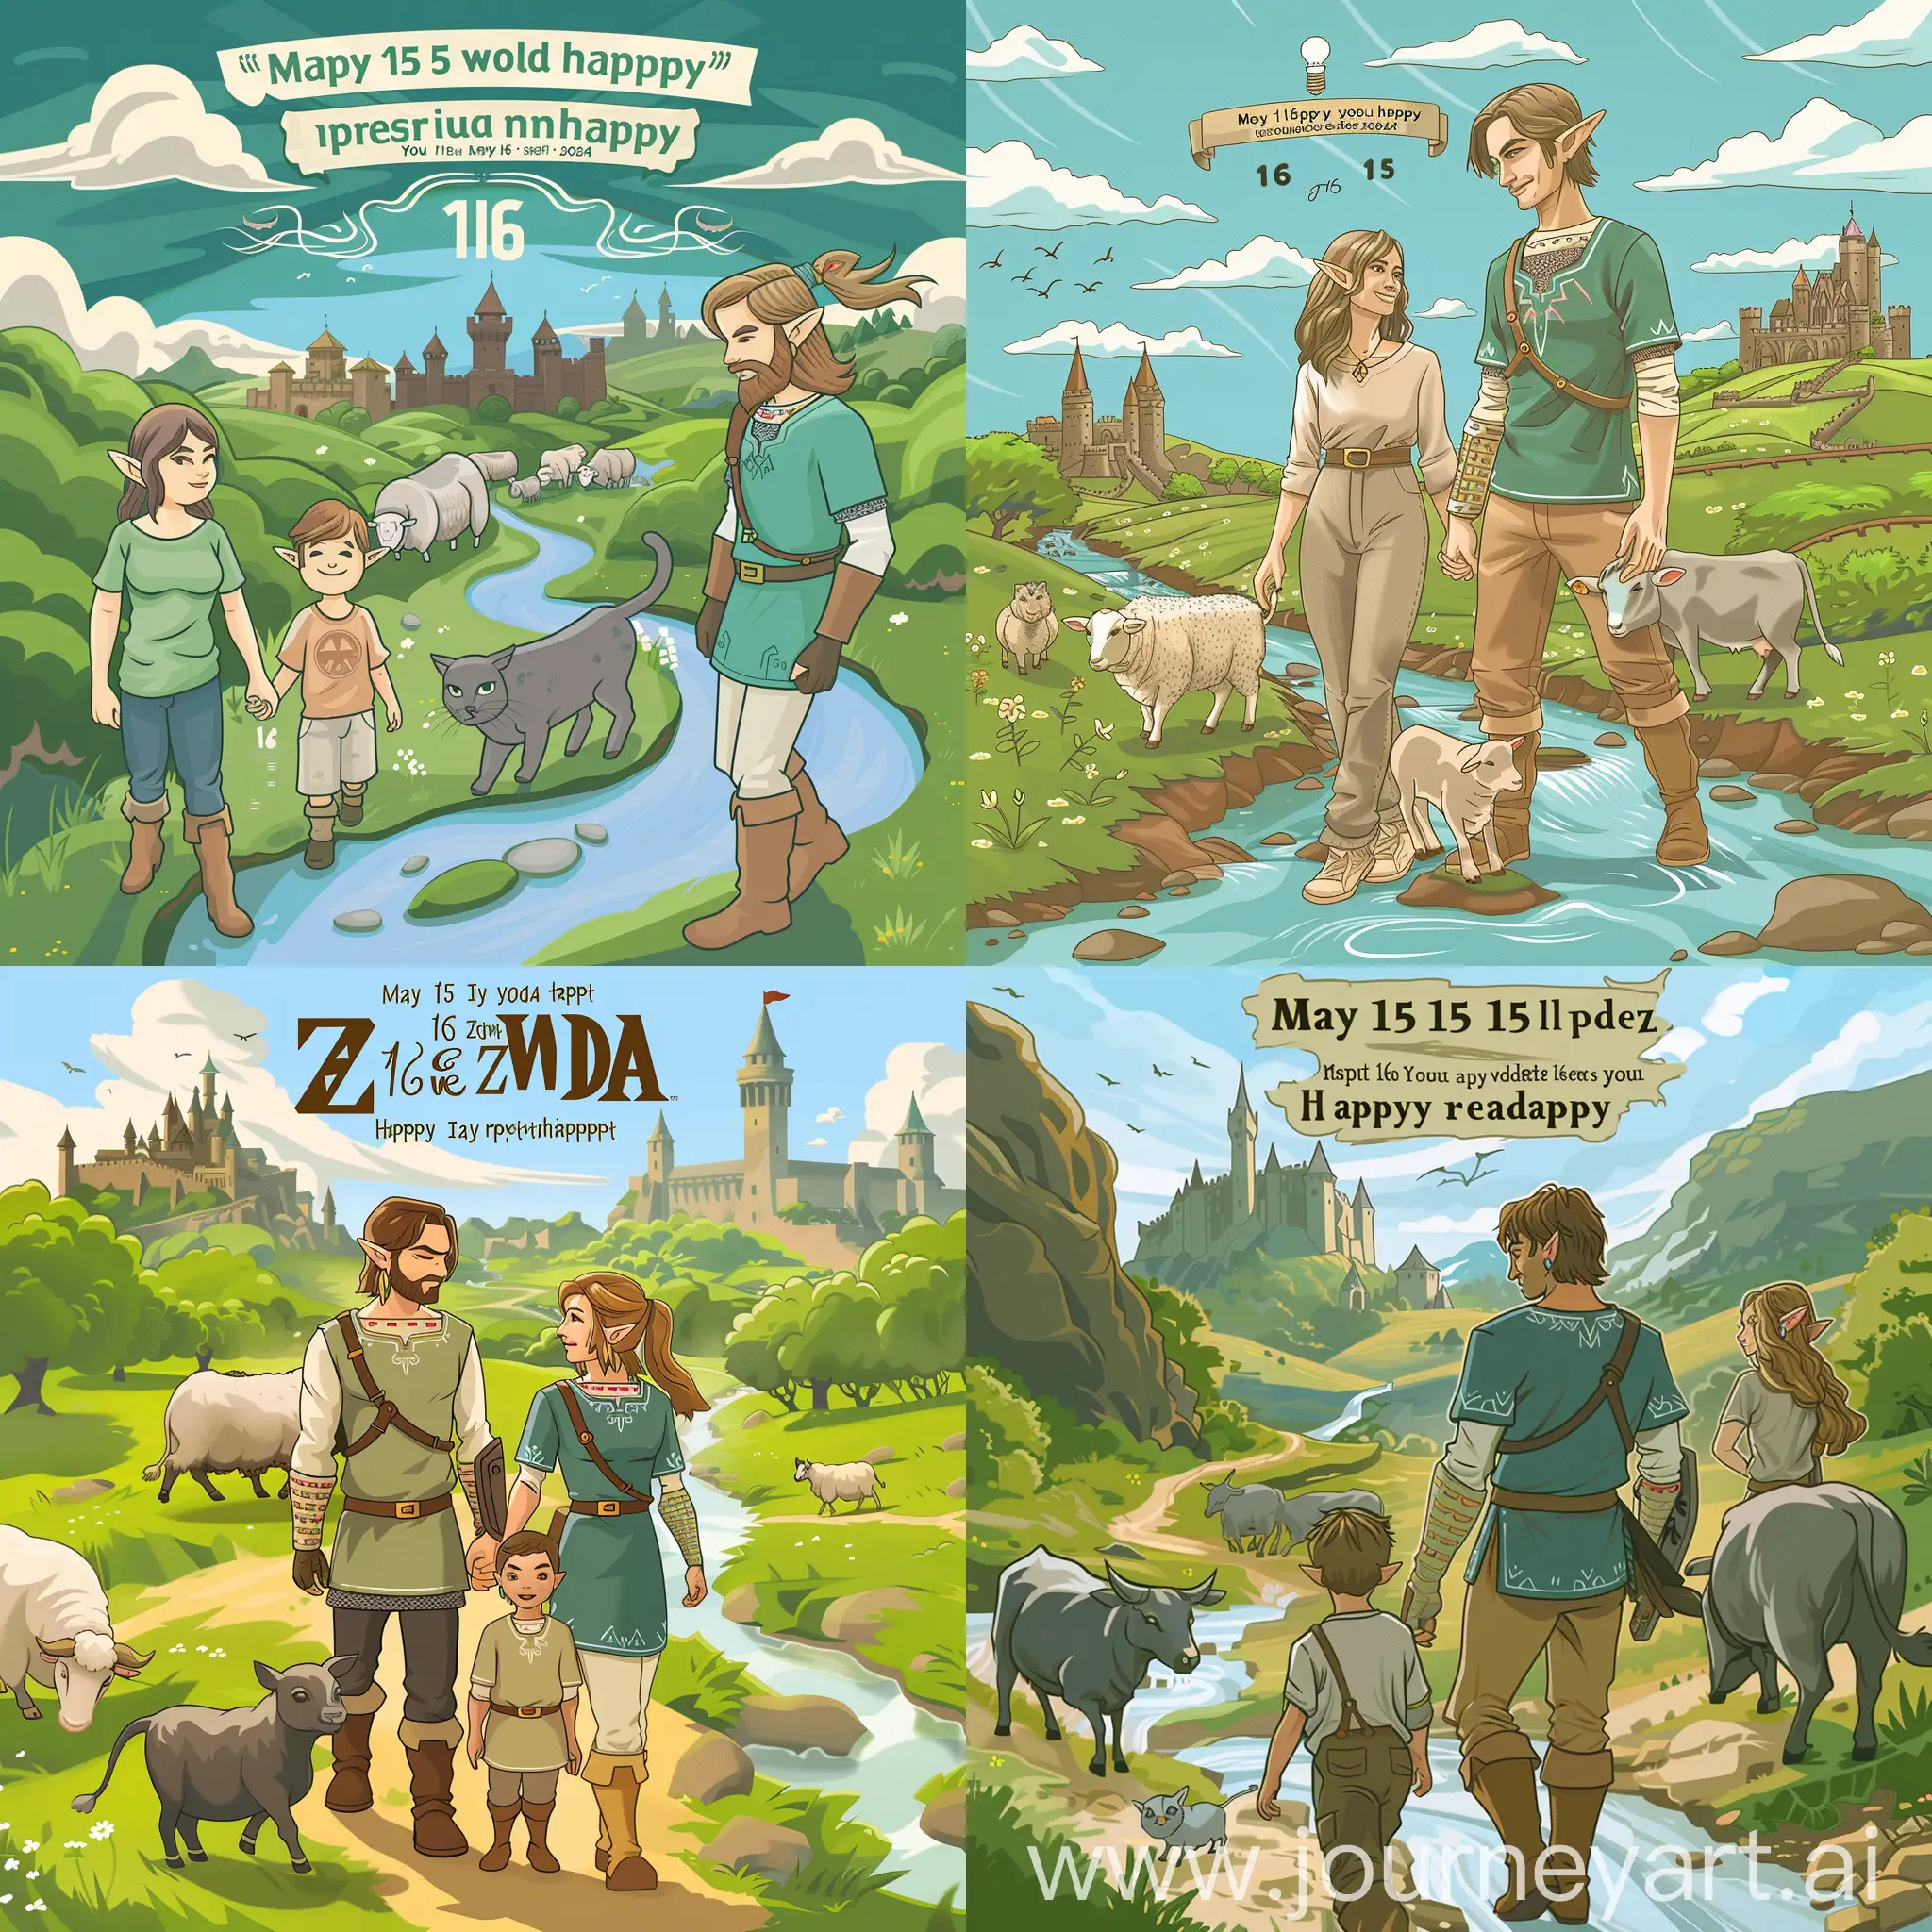 16th-Wedding-Anniversary-Celebration-in-Zelda-Style-Family-Castles-and-Sheep